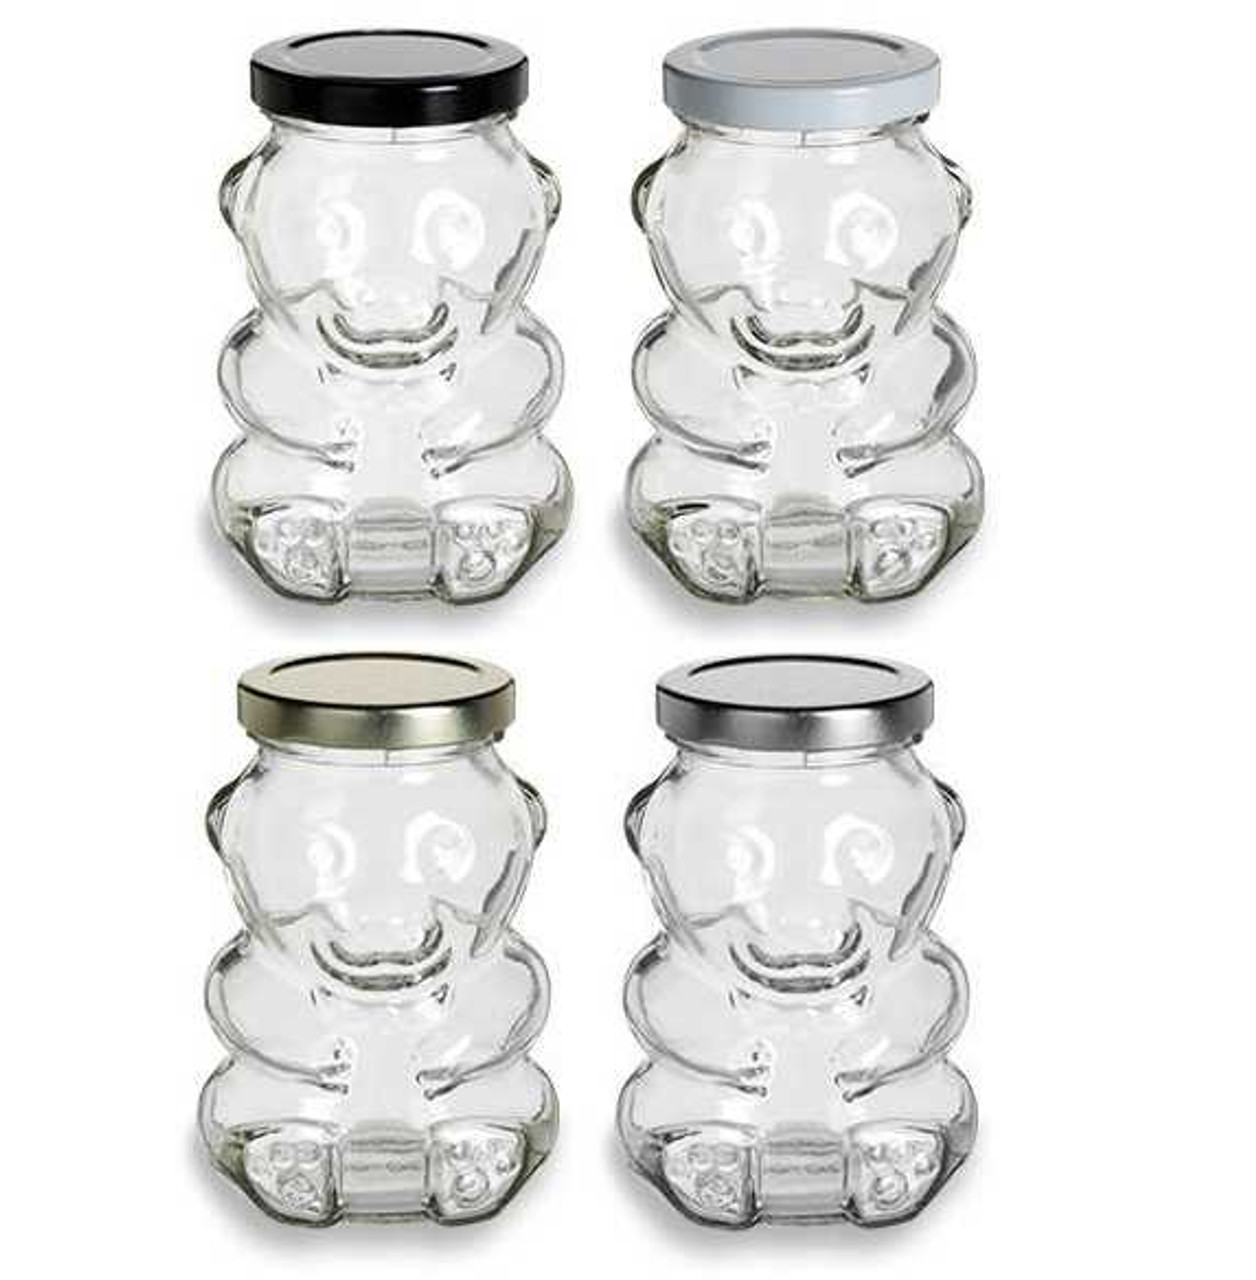 https://cdn11.bigcommerce.com/s-1ybtx/images/stencil/1280x1280/products/234/5256/9-oz-Glass-Bear-Jar-with-Plastisol-Lined-Lids_3076__63446.1699987672.jpg?c=2?imbypass=on